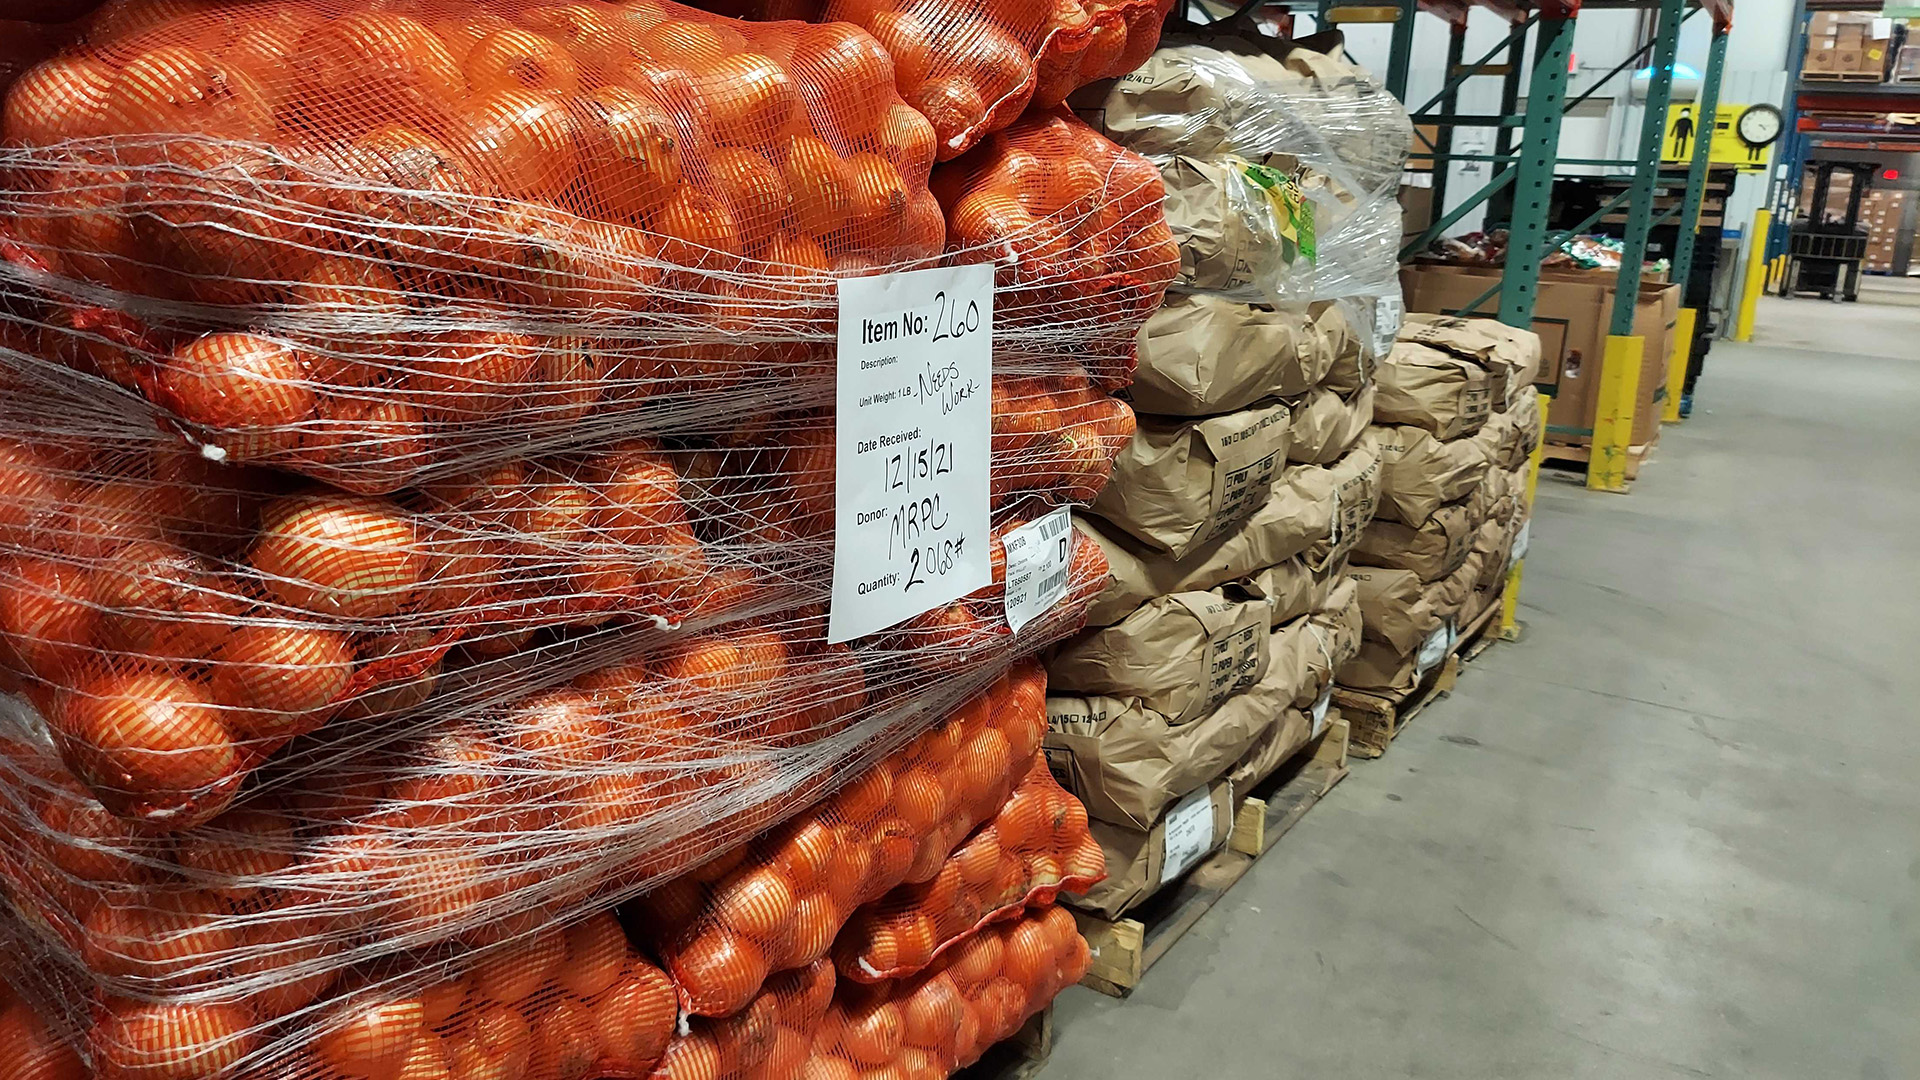 Bags of onions are stacked on a pallet alongside other bulk packaged food inside a warehouse.